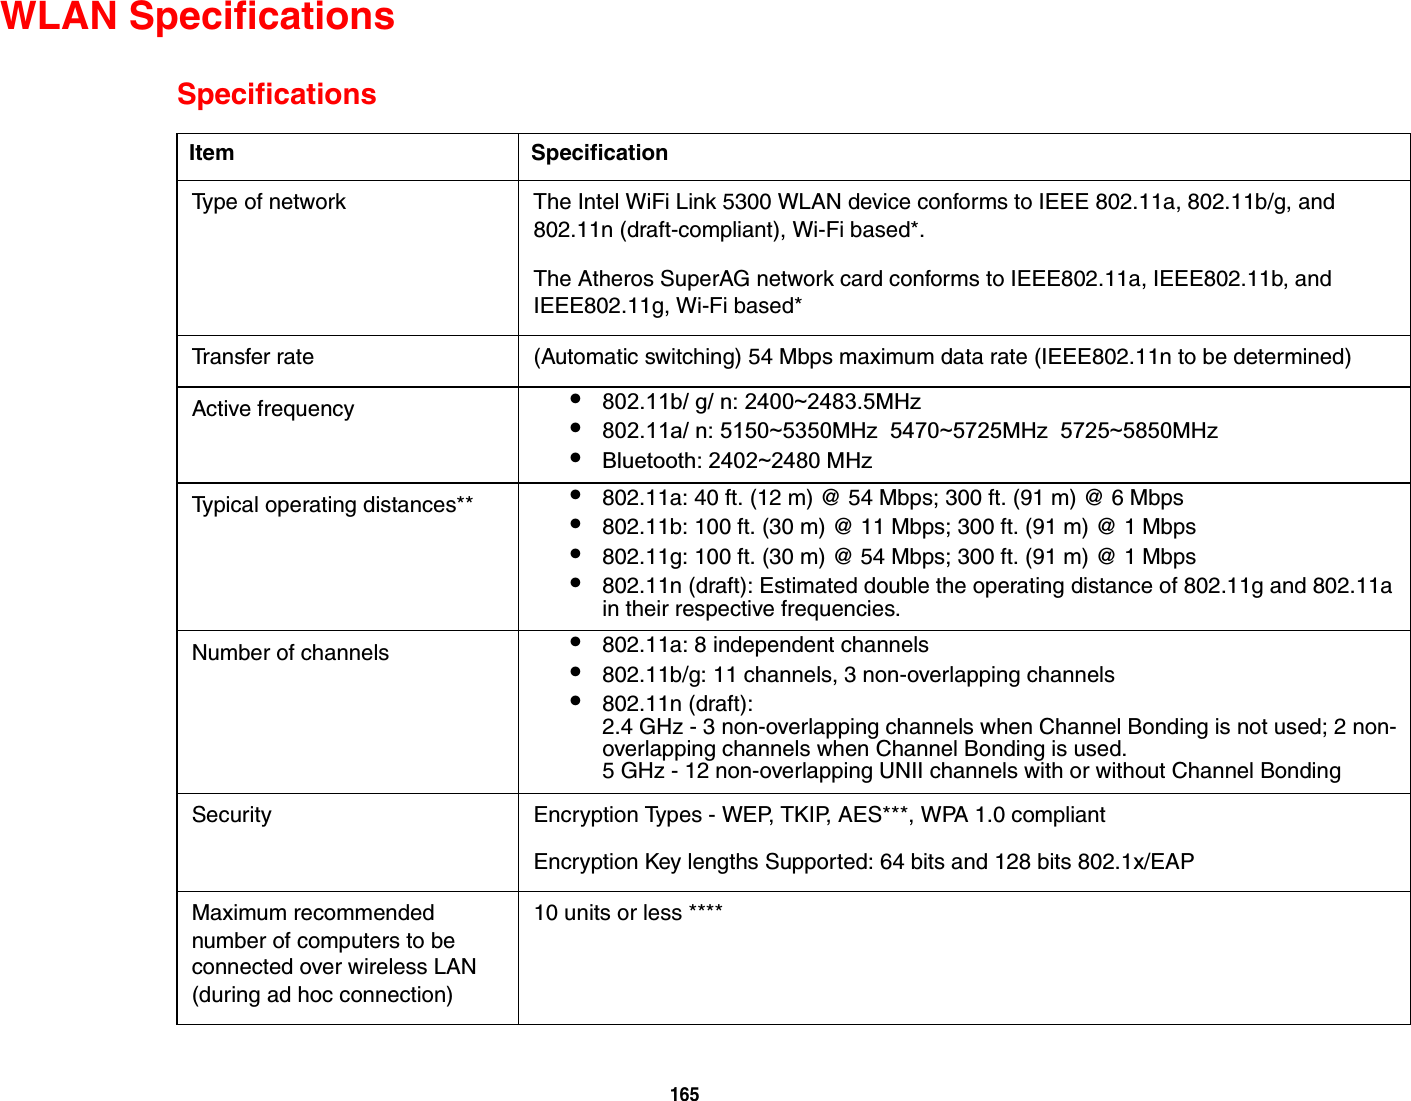 165WLAN SpecificationsSpecificationsItem SpecificationType of network  The Intel WiFi Link 5300 WLAN device conforms to IEEE 802.11a, 802.11b/g, and 802.11n (draft-compliant), Wi-Fi based*.The Atheros SuperAG network card conforms to IEEE802.11a, IEEE802.11b, and IEEE802.11g, Wi-Fi based*Transfer rate (Automatic switching) 54 Mbps maximum data rate (IEEE802.11n to be determined)Active frequency •802.11b/ g/ n: 2400~2483.5MHz•802.11a/ n: 5150~5350MHz  5470~5725MHz  5725~5850MHz•Bluetooth: 2402~2480 MHzTypical operating distances** •802.11a: 40 ft. (12 m) @ 54 Mbps; 300 ft. (91 m) @ 6 Mbps•802.11b: 100 ft. (30 m) @ 11 Mbps; 300 ft. (91 m) @ 1 Mbps•802.11g: 100 ft. (30 m) @ 54 Mbps; 300 ft. (91 m) @ 1 Mbps•802.11n (draft): Estimated double the operating distance of 802.11g and 802.11a in their respective frequencies.Number of channels •802.11a: 8 independent channels•802.11b/g: 11 channels, 3 non-overlapping channels •802.11n (draft): 2.4 GHz - 3 non-overlapping channels when Channel Bonding is not used; 2 non-overlapping channels when Channel Bonding is used.5 GHz - 12 non-overlapping UNII channels with or without Channel Bonding Security  Encryption Types - WEP, TKIP, AES***, WPA 1.0 compliant Encryption Key lengths Supported: 64 bits and 128 bits 802.1x/EAPMaximum recommended number of computers to be connected over wireless LAN (during ad hoc connection)10 units or less ****